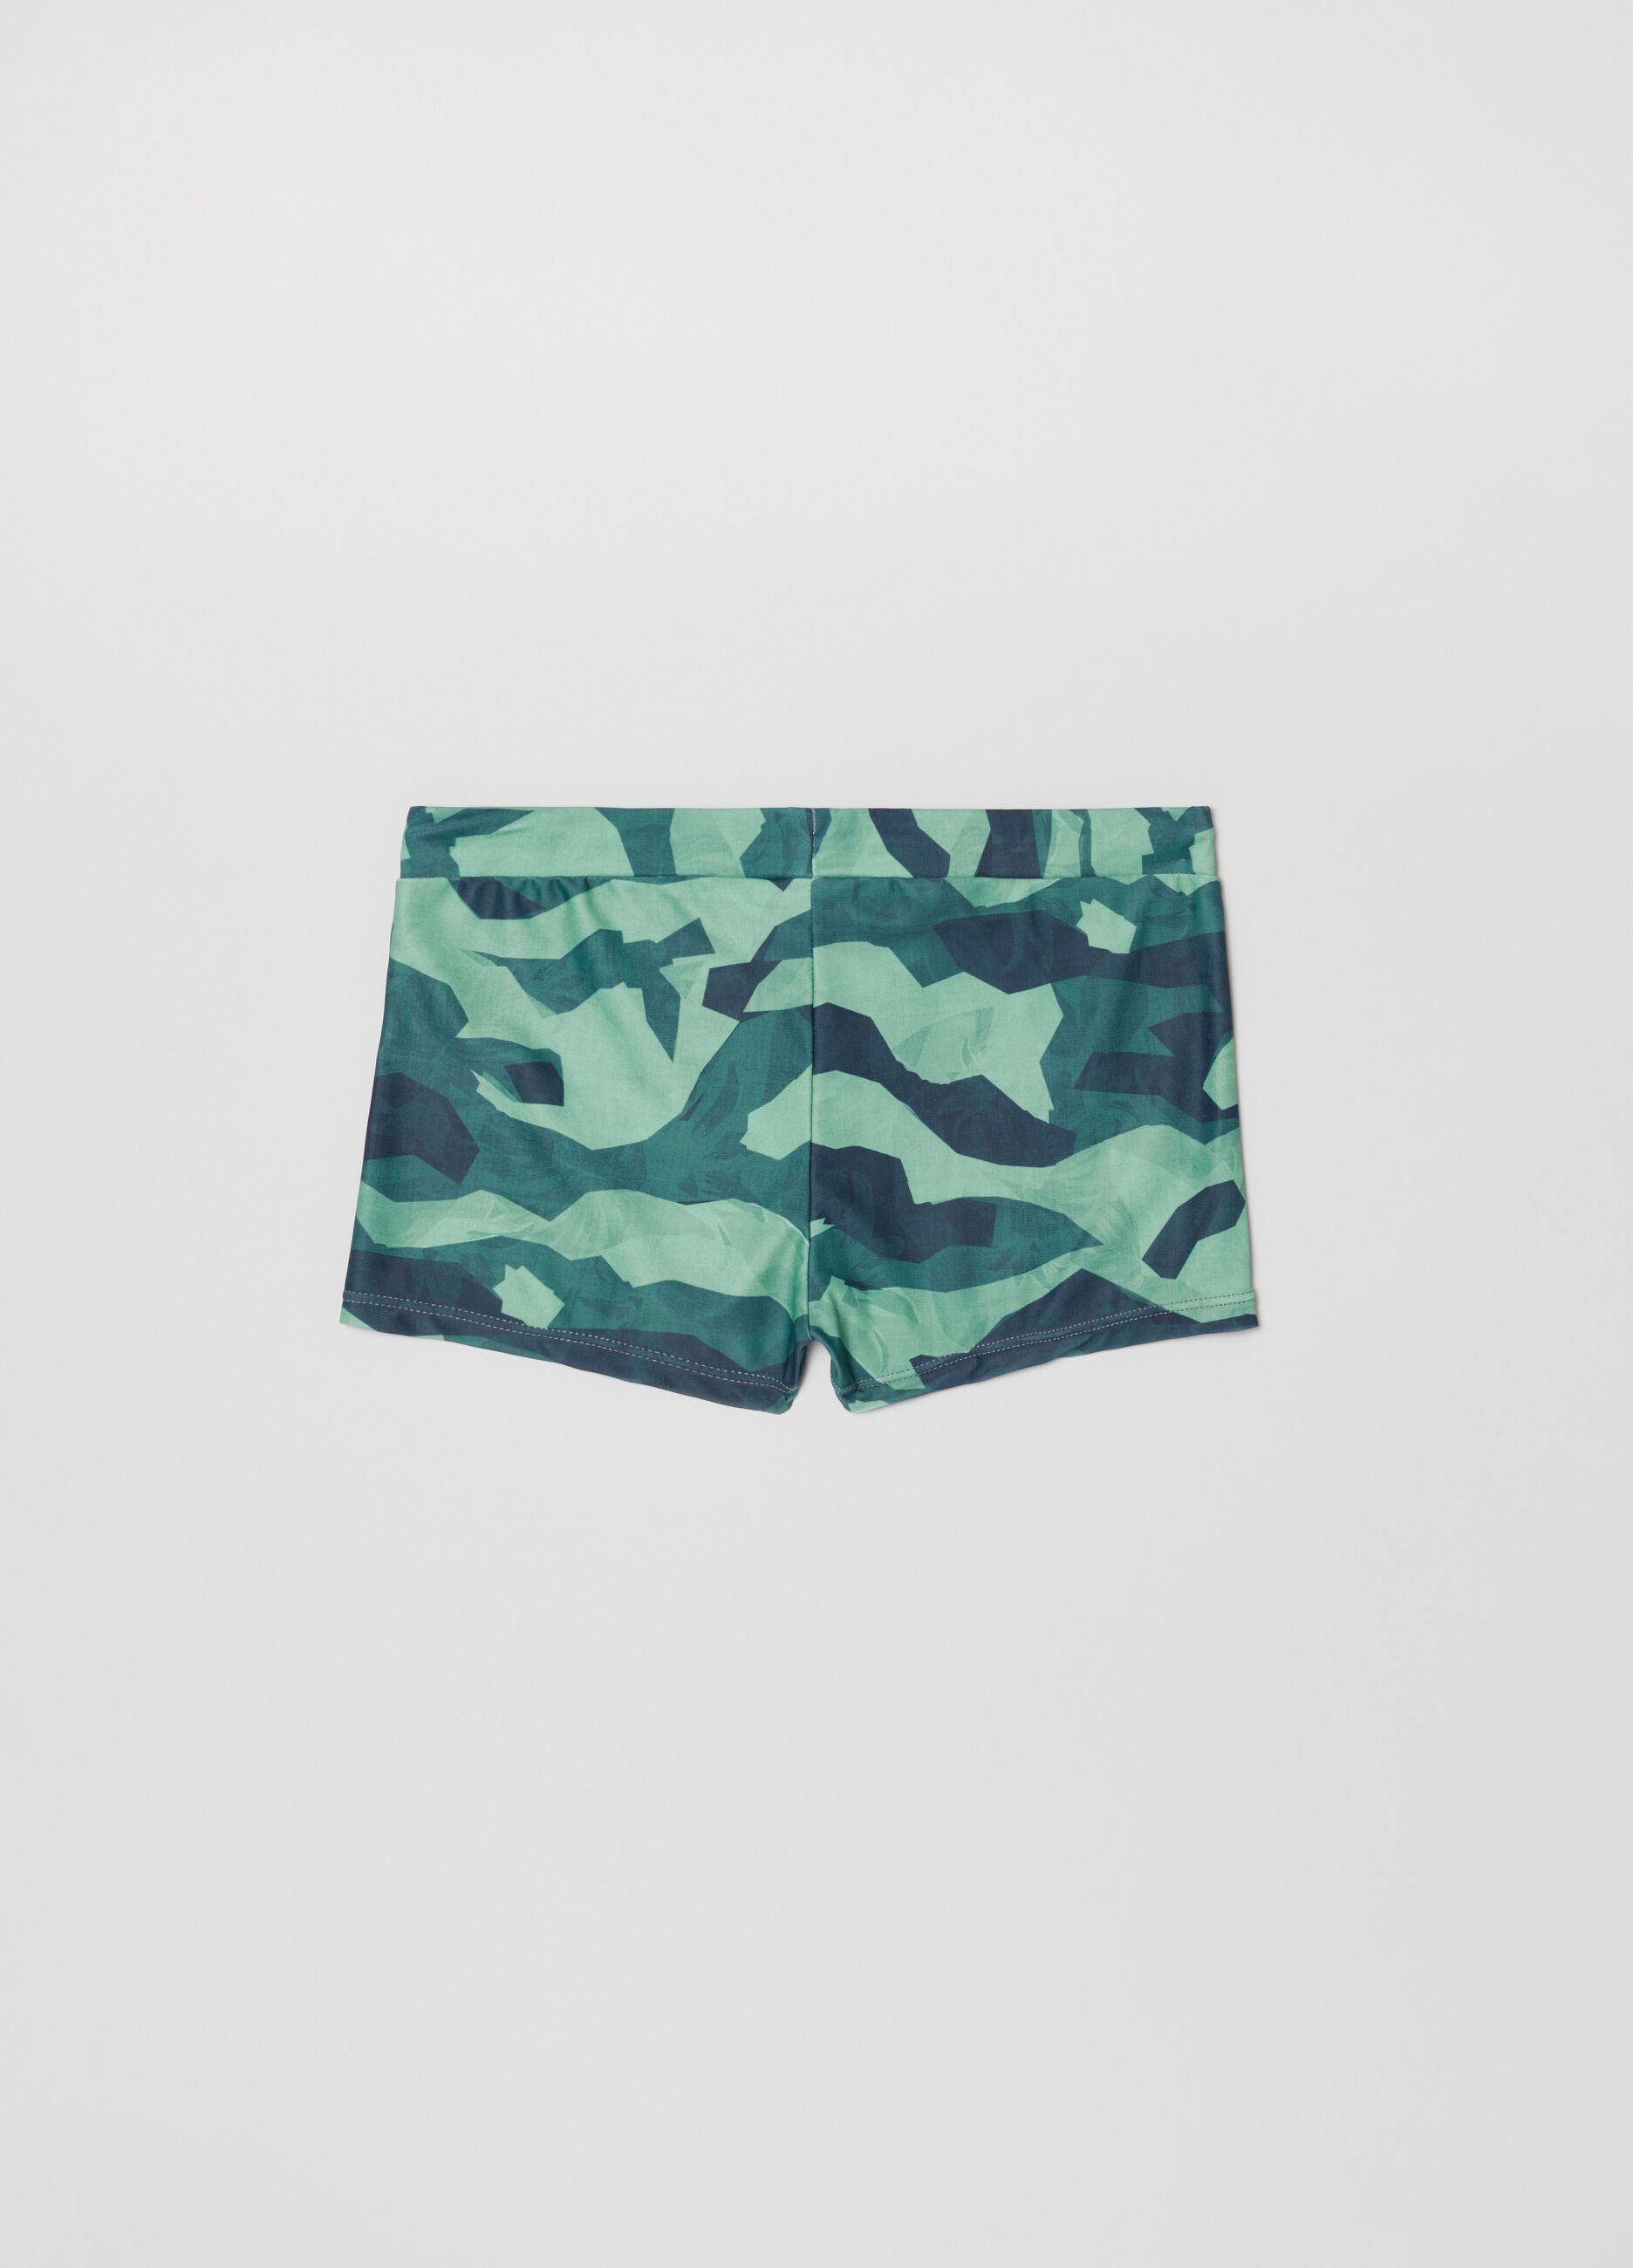 Maui and Sons swimming trunks with camo print